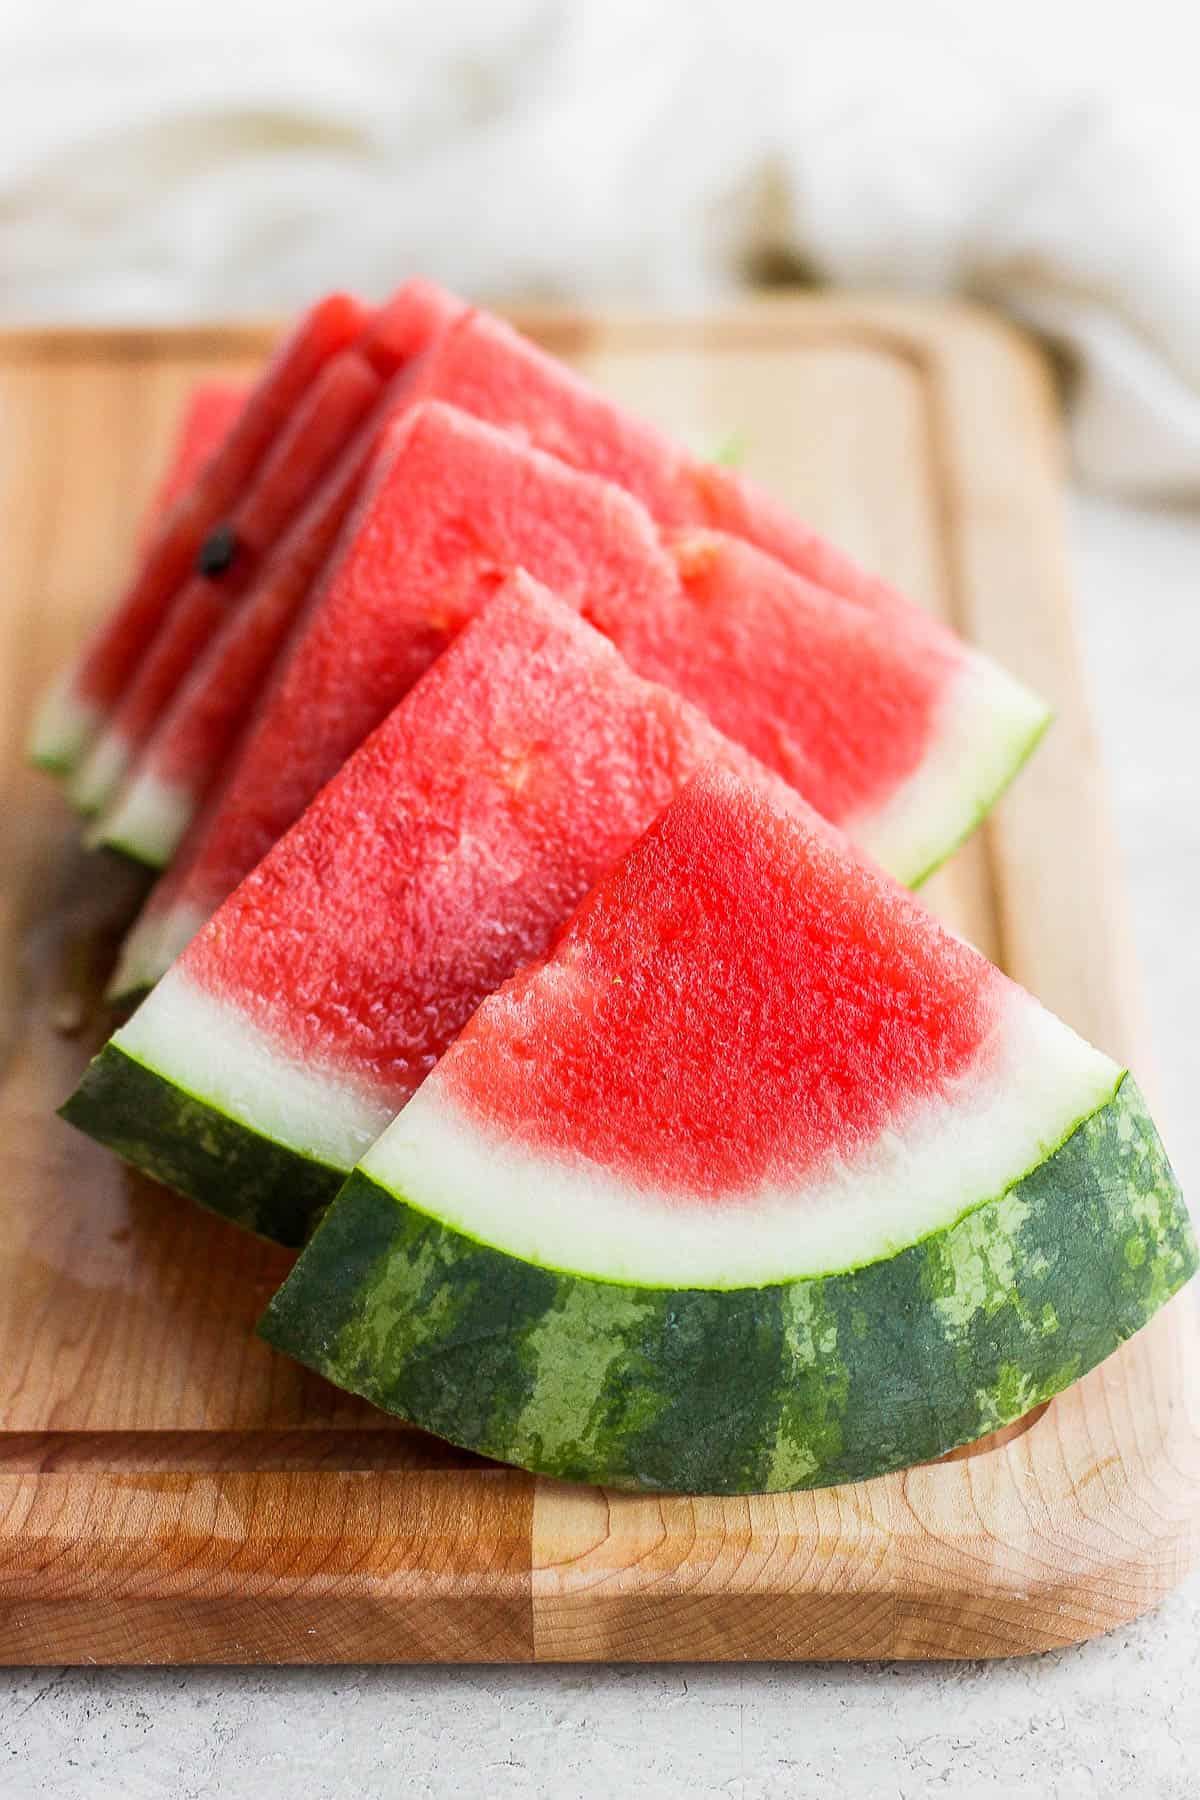 How to easily cut a watermelon (cubes, sticks, & triangle slices).